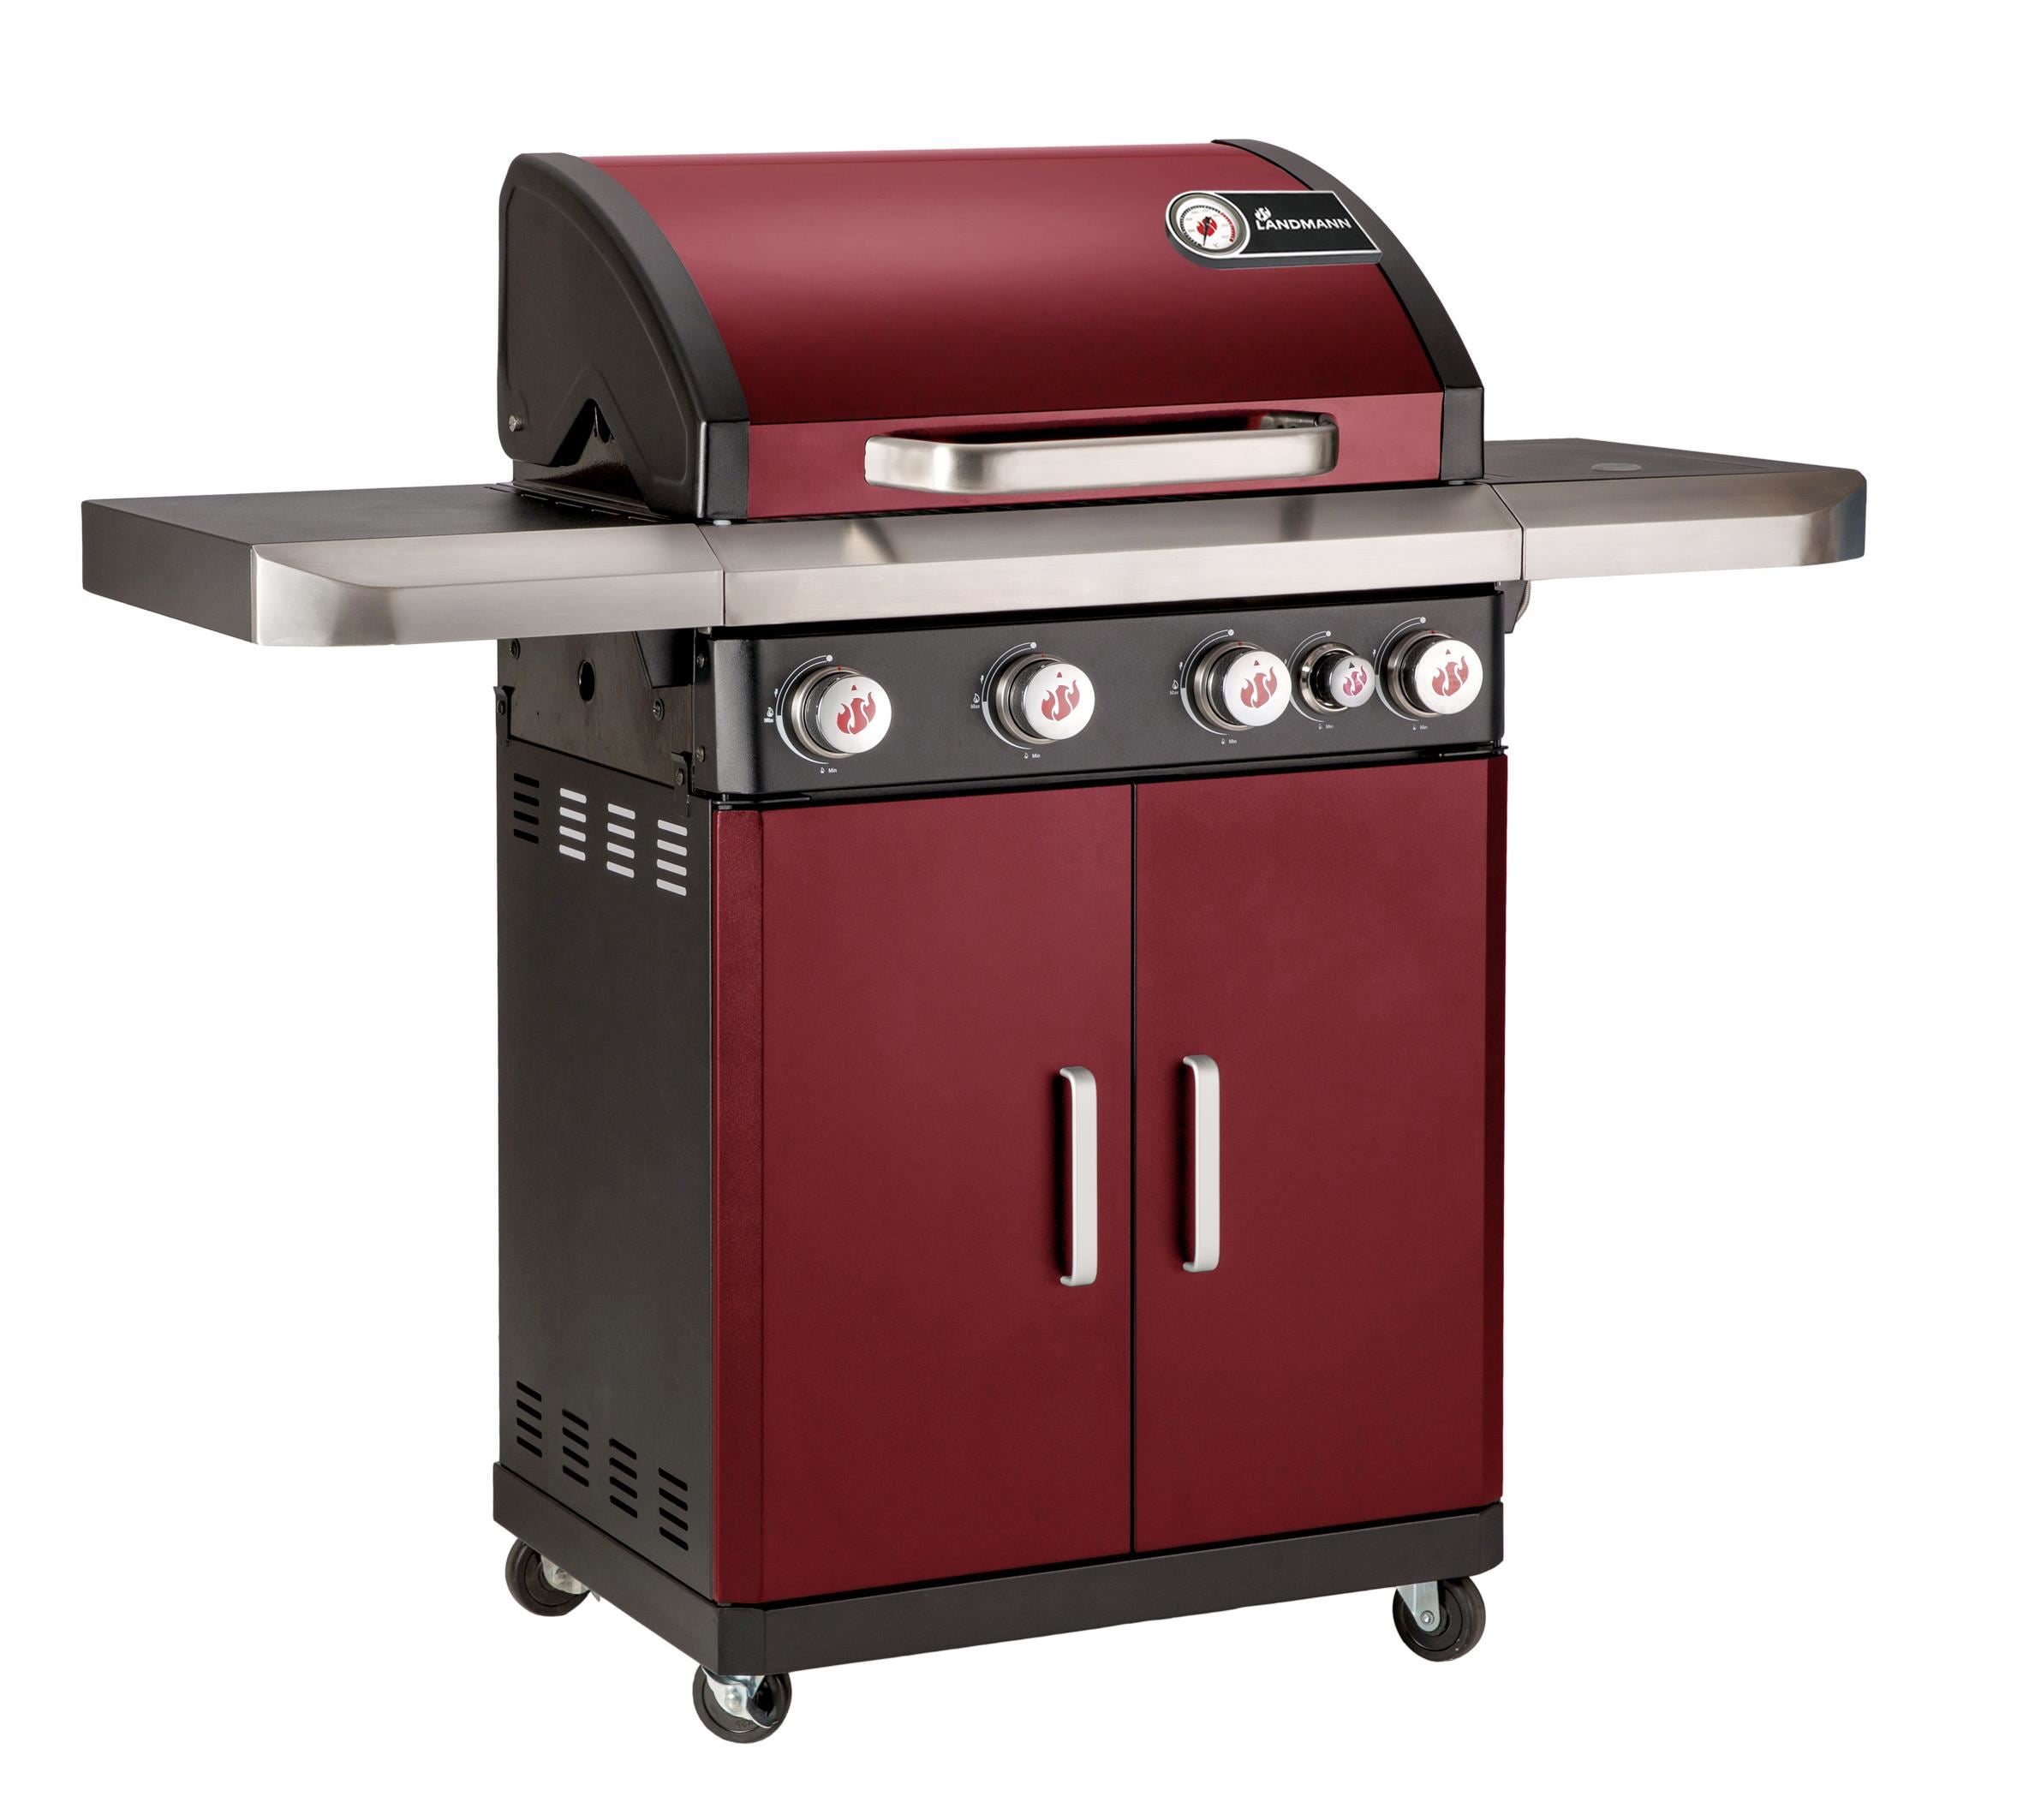 Rexon cooK 4.1 Gas BBQ - Red & Weatherproof Cover